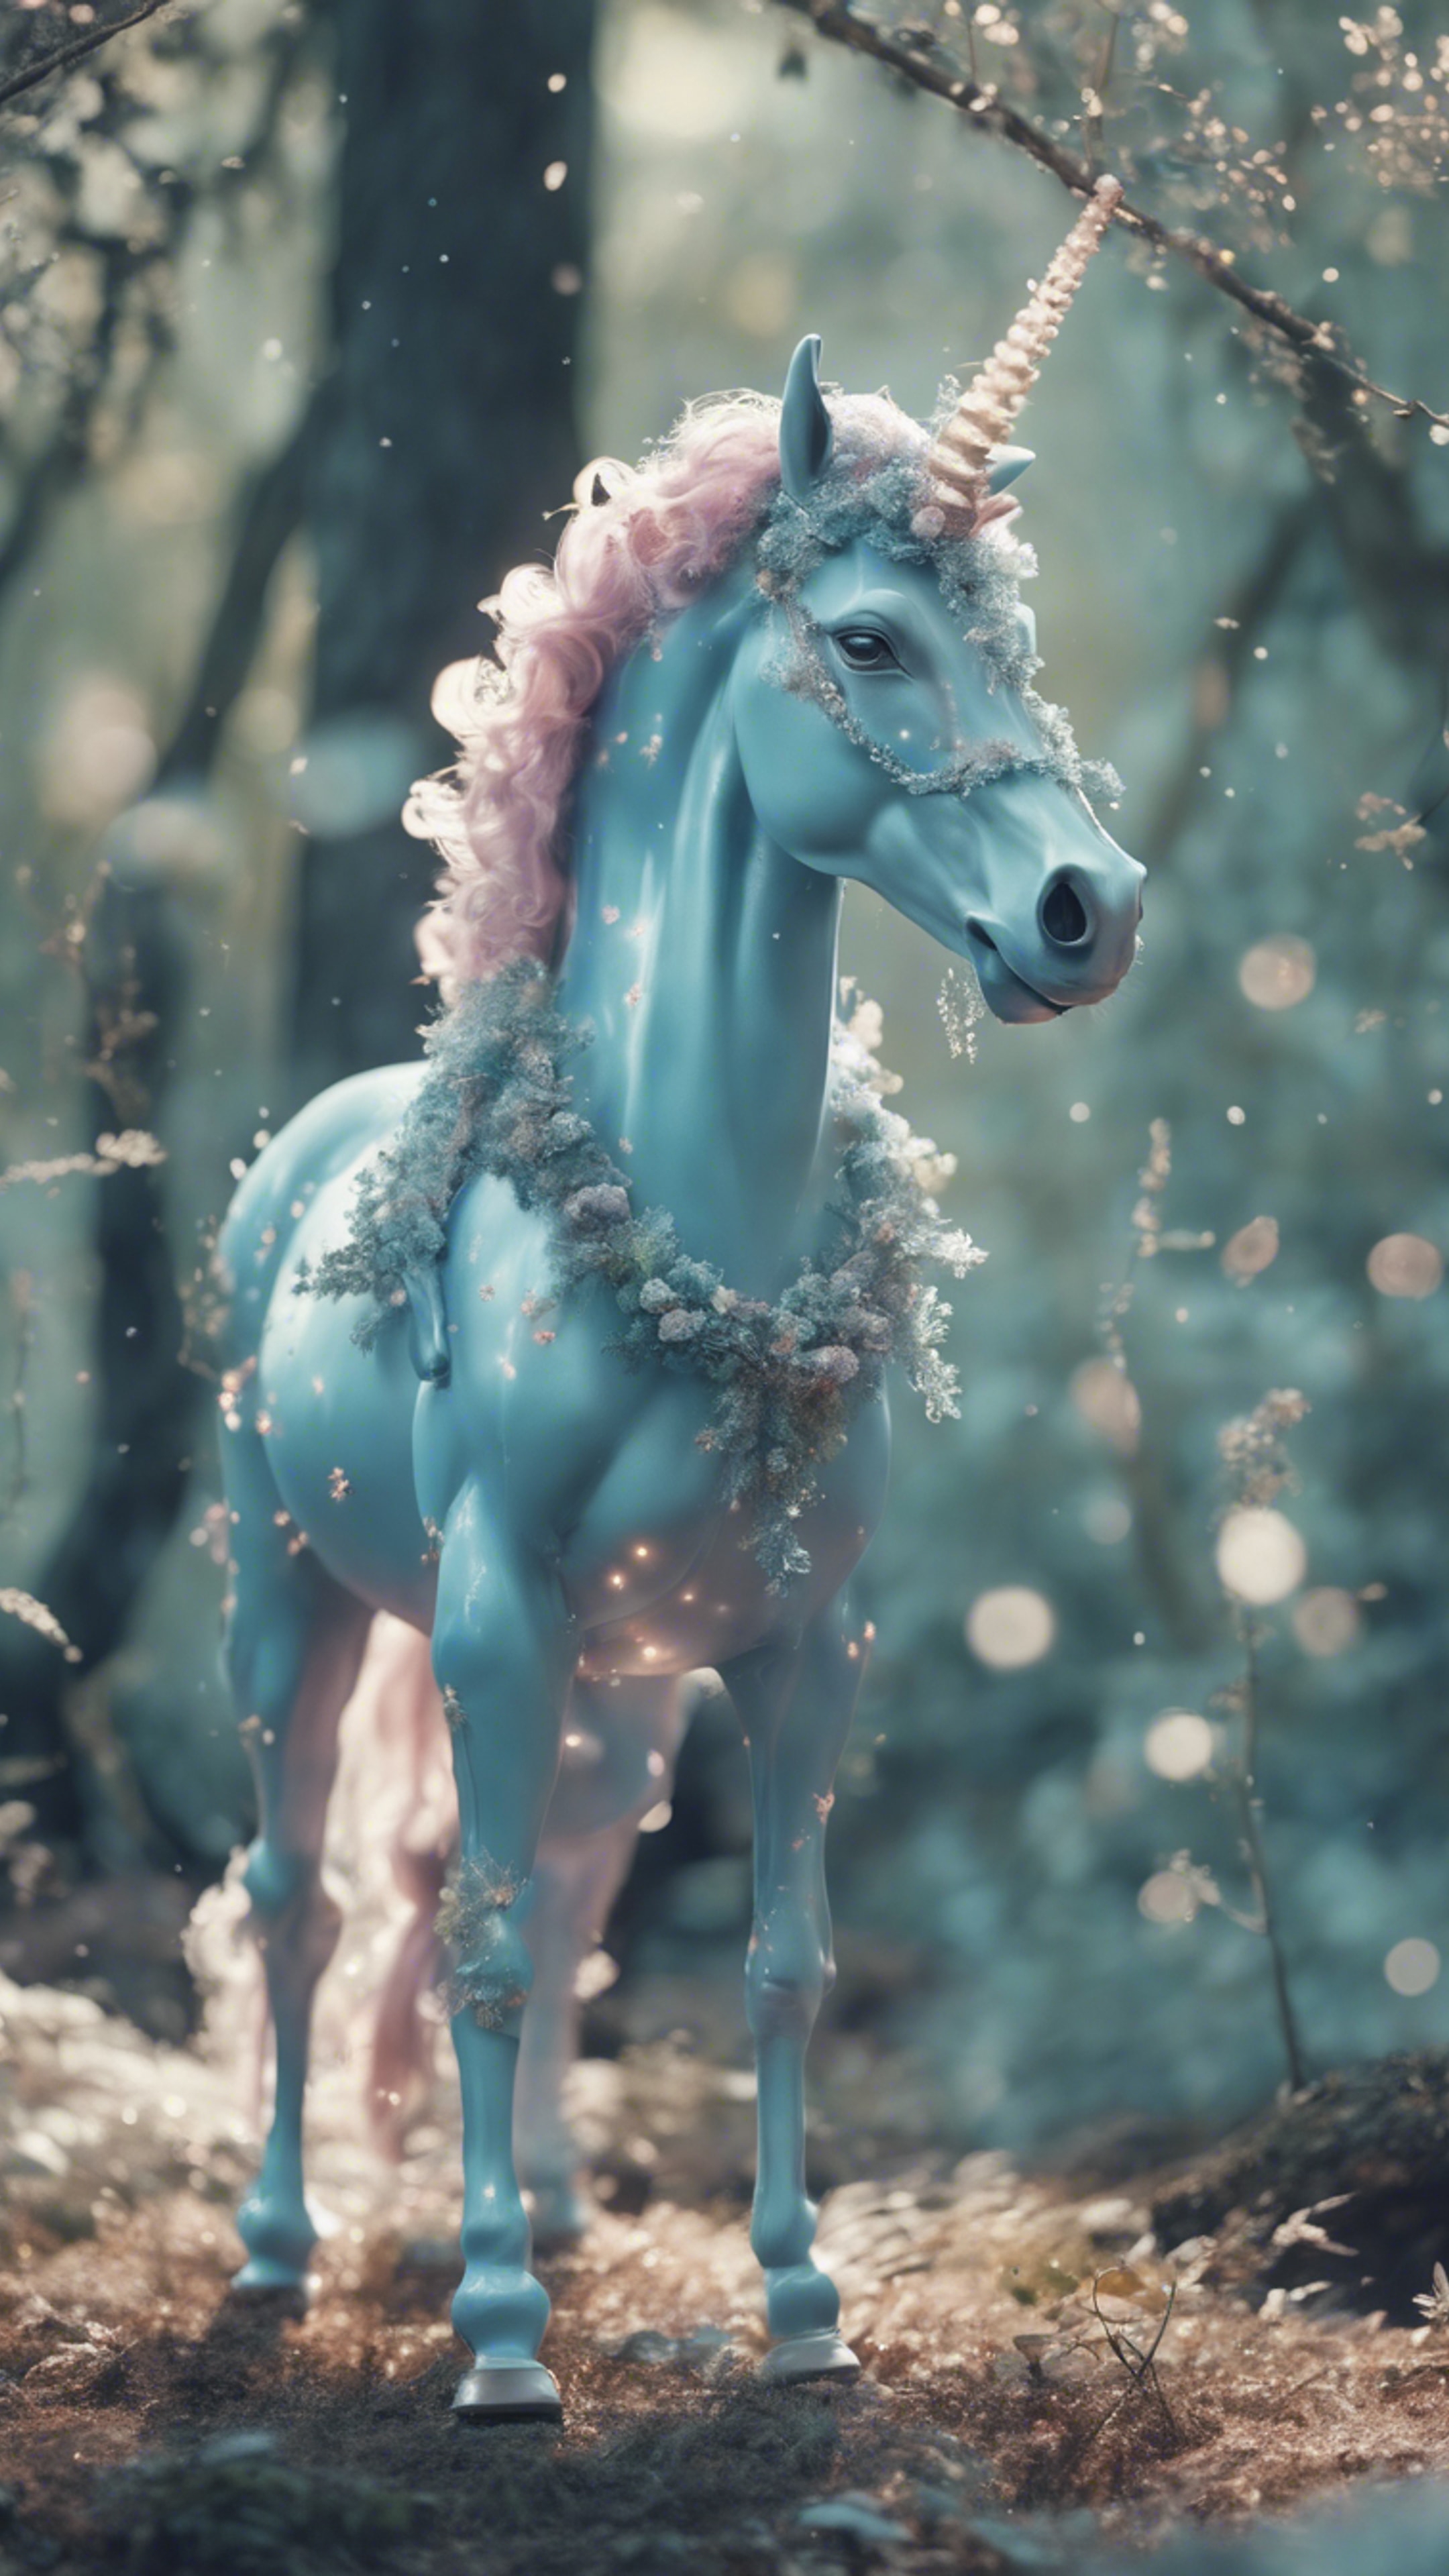 A whimsical pastel blue unicorn standing in a magical forest. Fondo de pantalla[9fc4aee892994beaa25a]